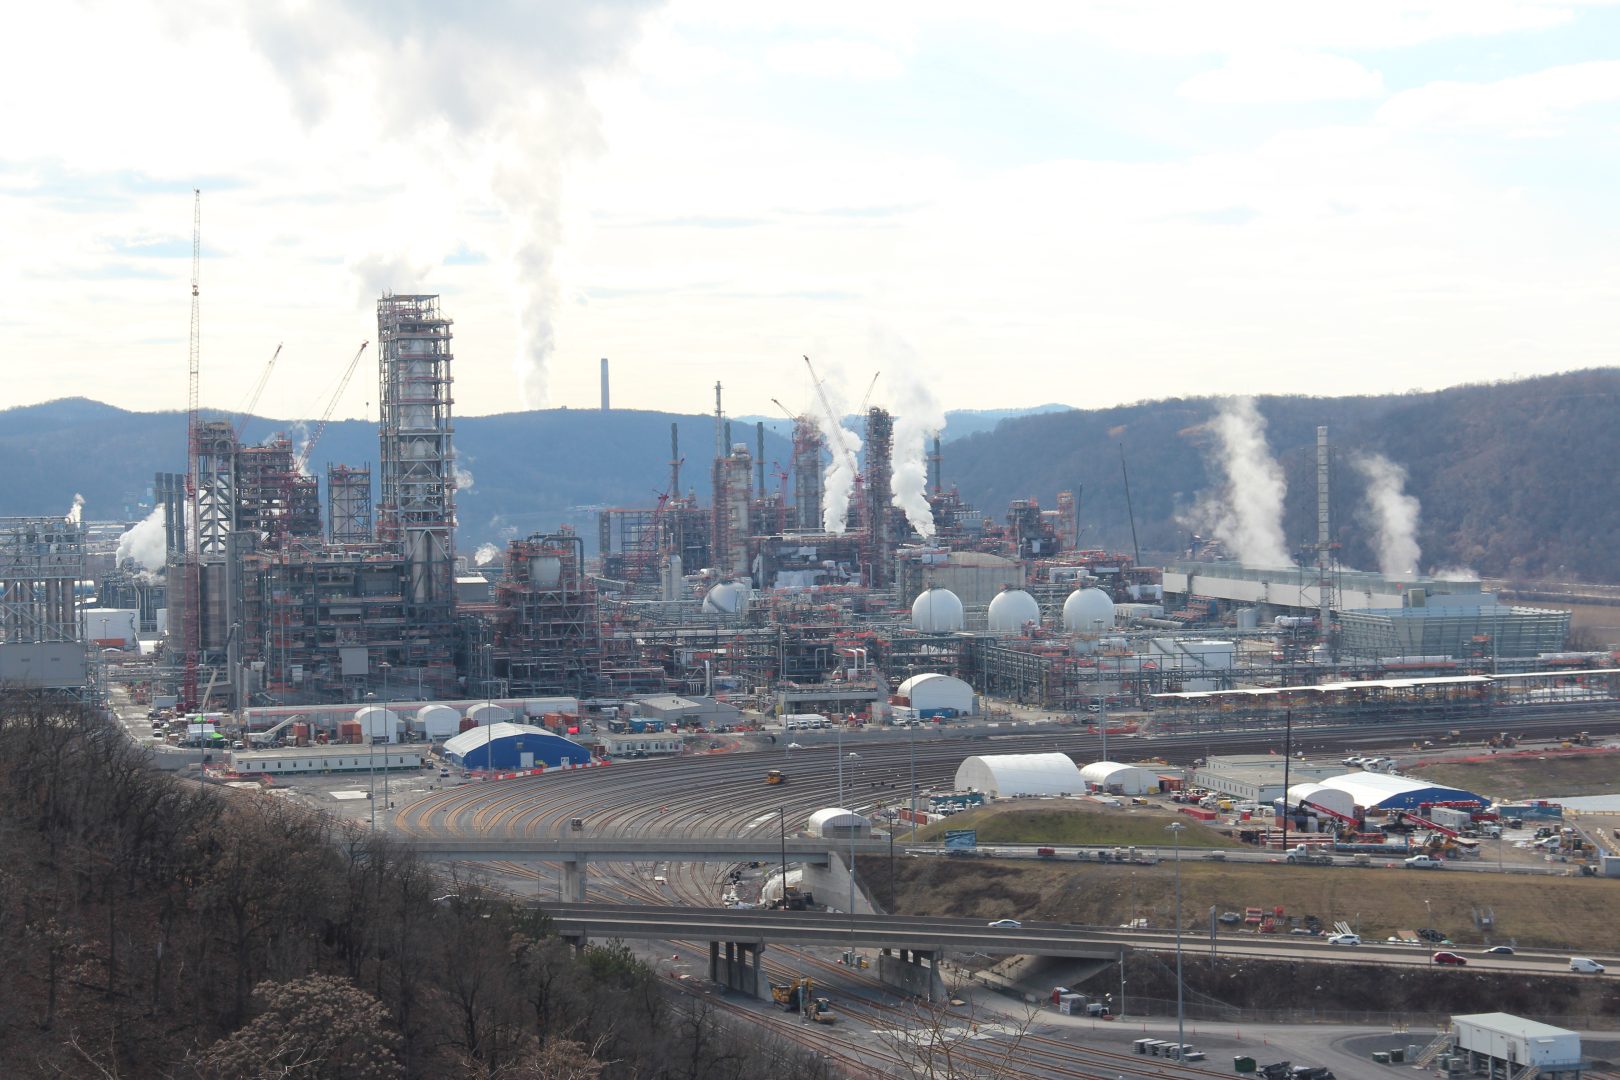 A sprawling industrial facility emits various substances into the air on a cloudy winter day.